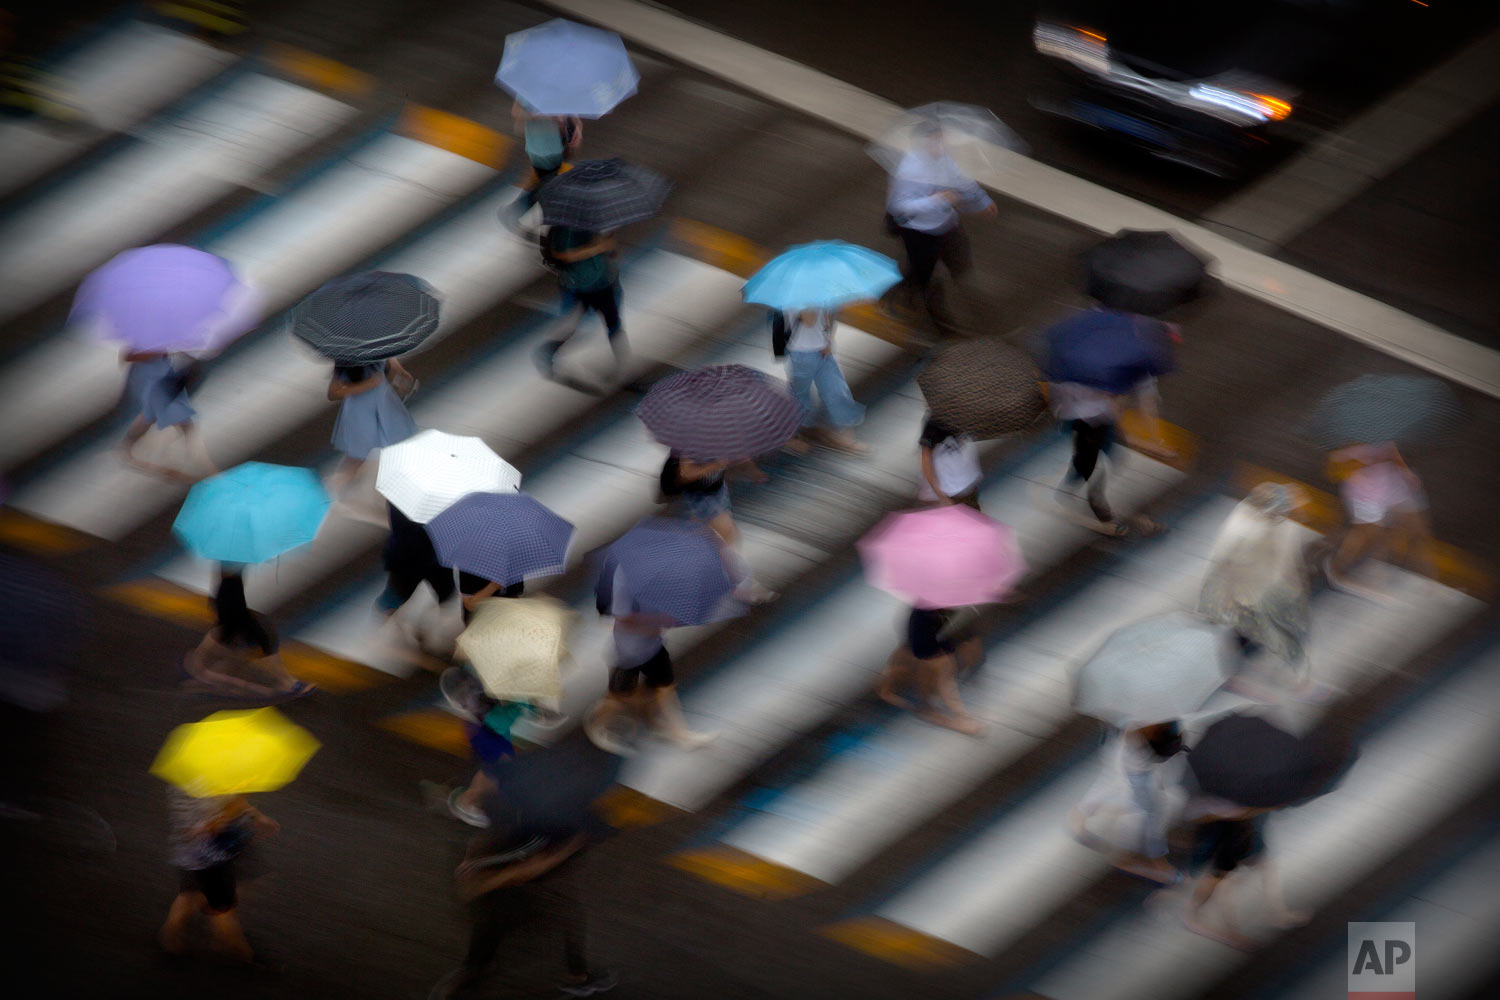  In this photo taken with a long exposure, pedestrians carry umbrellas as they cross a street in Beijing, Tuesday, July 24, 2018. The remnants of Typhoon Ampil brought heavy rain to China's capital on Tuesday morning. (AP Photo/Mark Schiefelbein) 